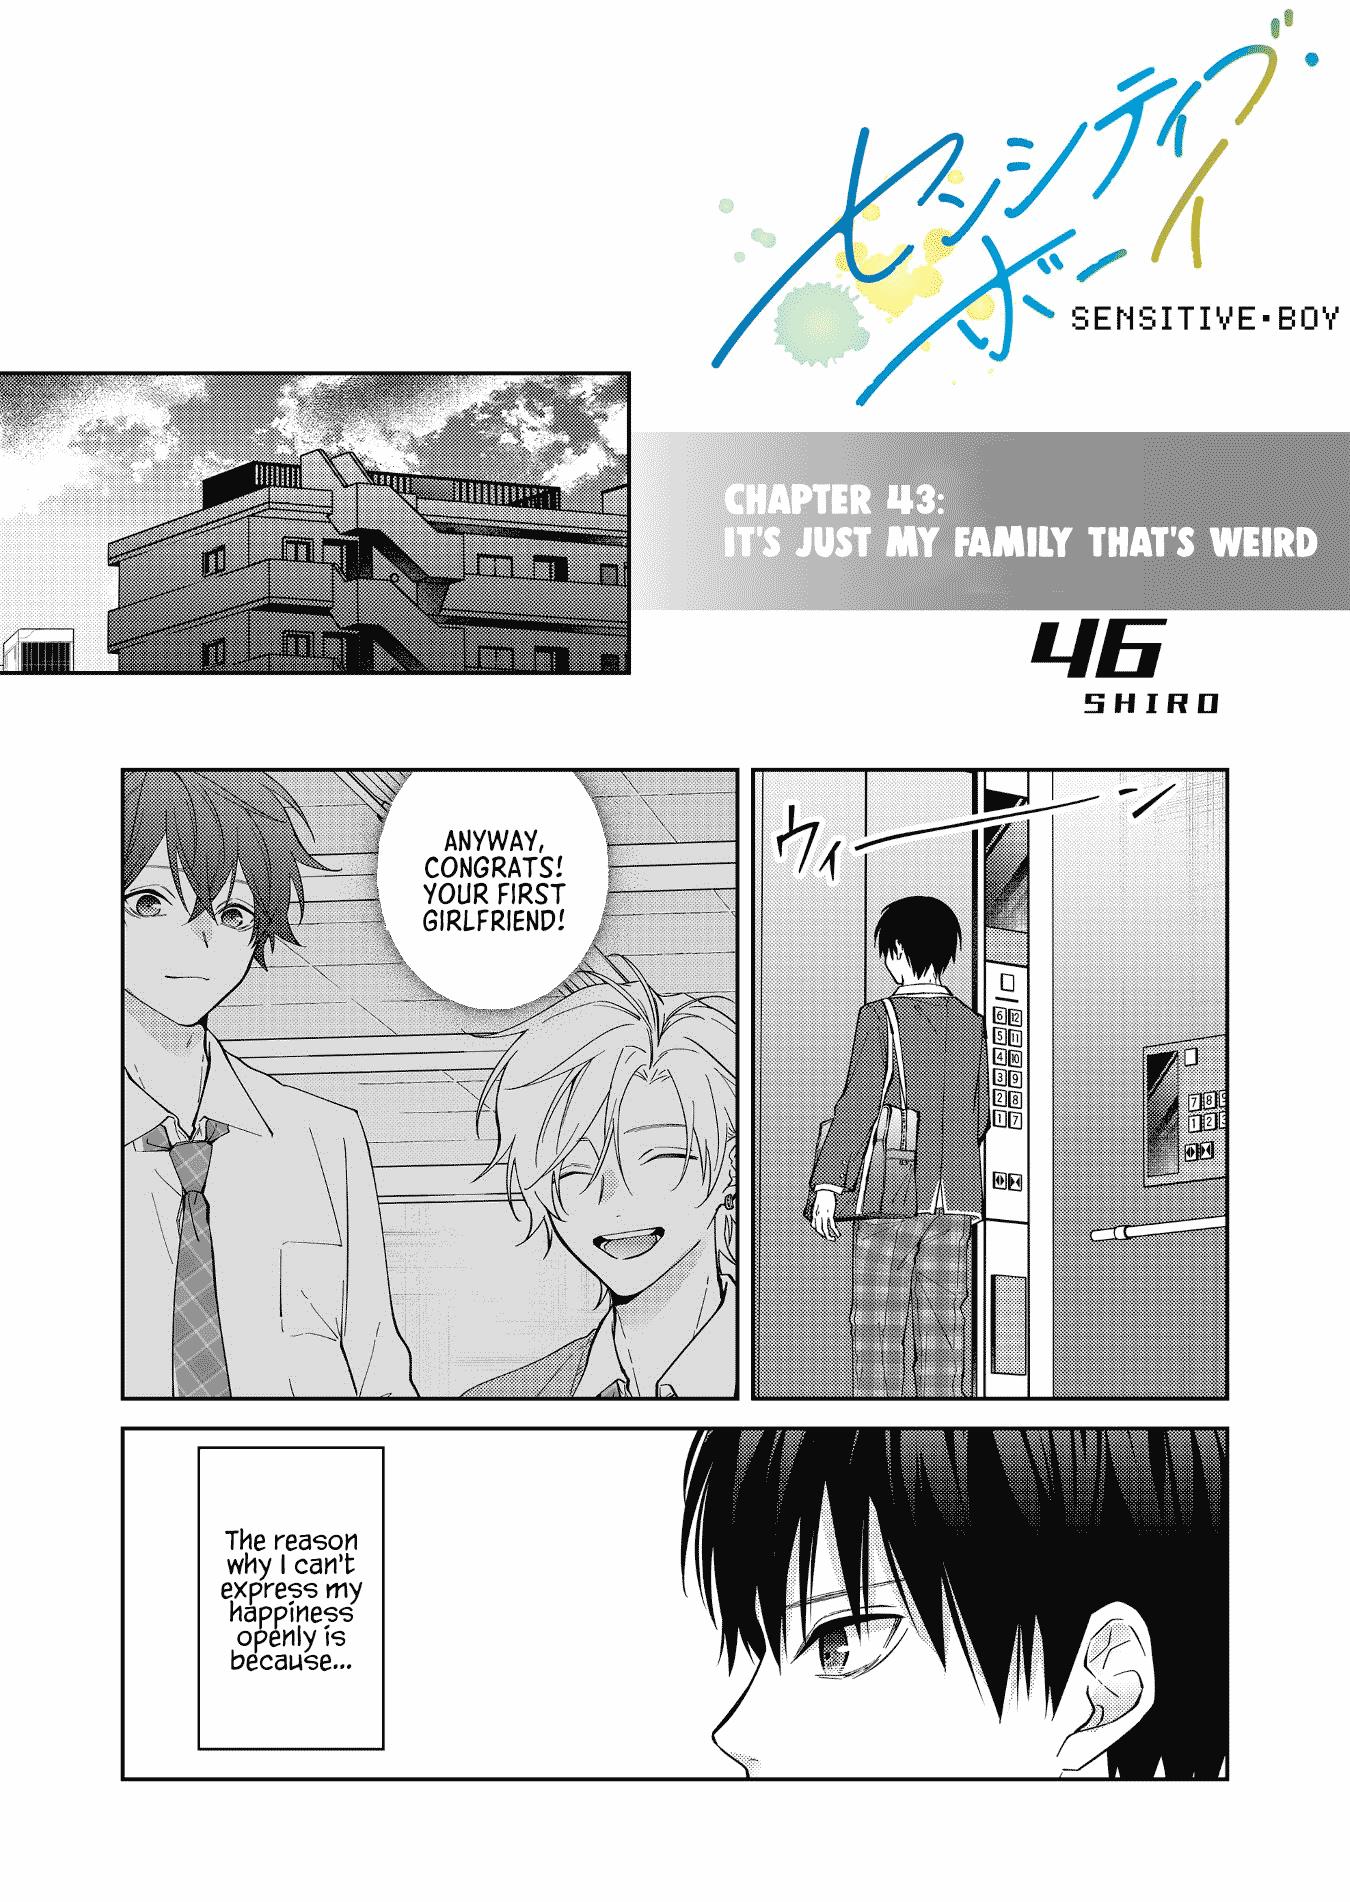 Sensitive Boy Chapter 43: It's Just My Family That's Weird - Picture 1